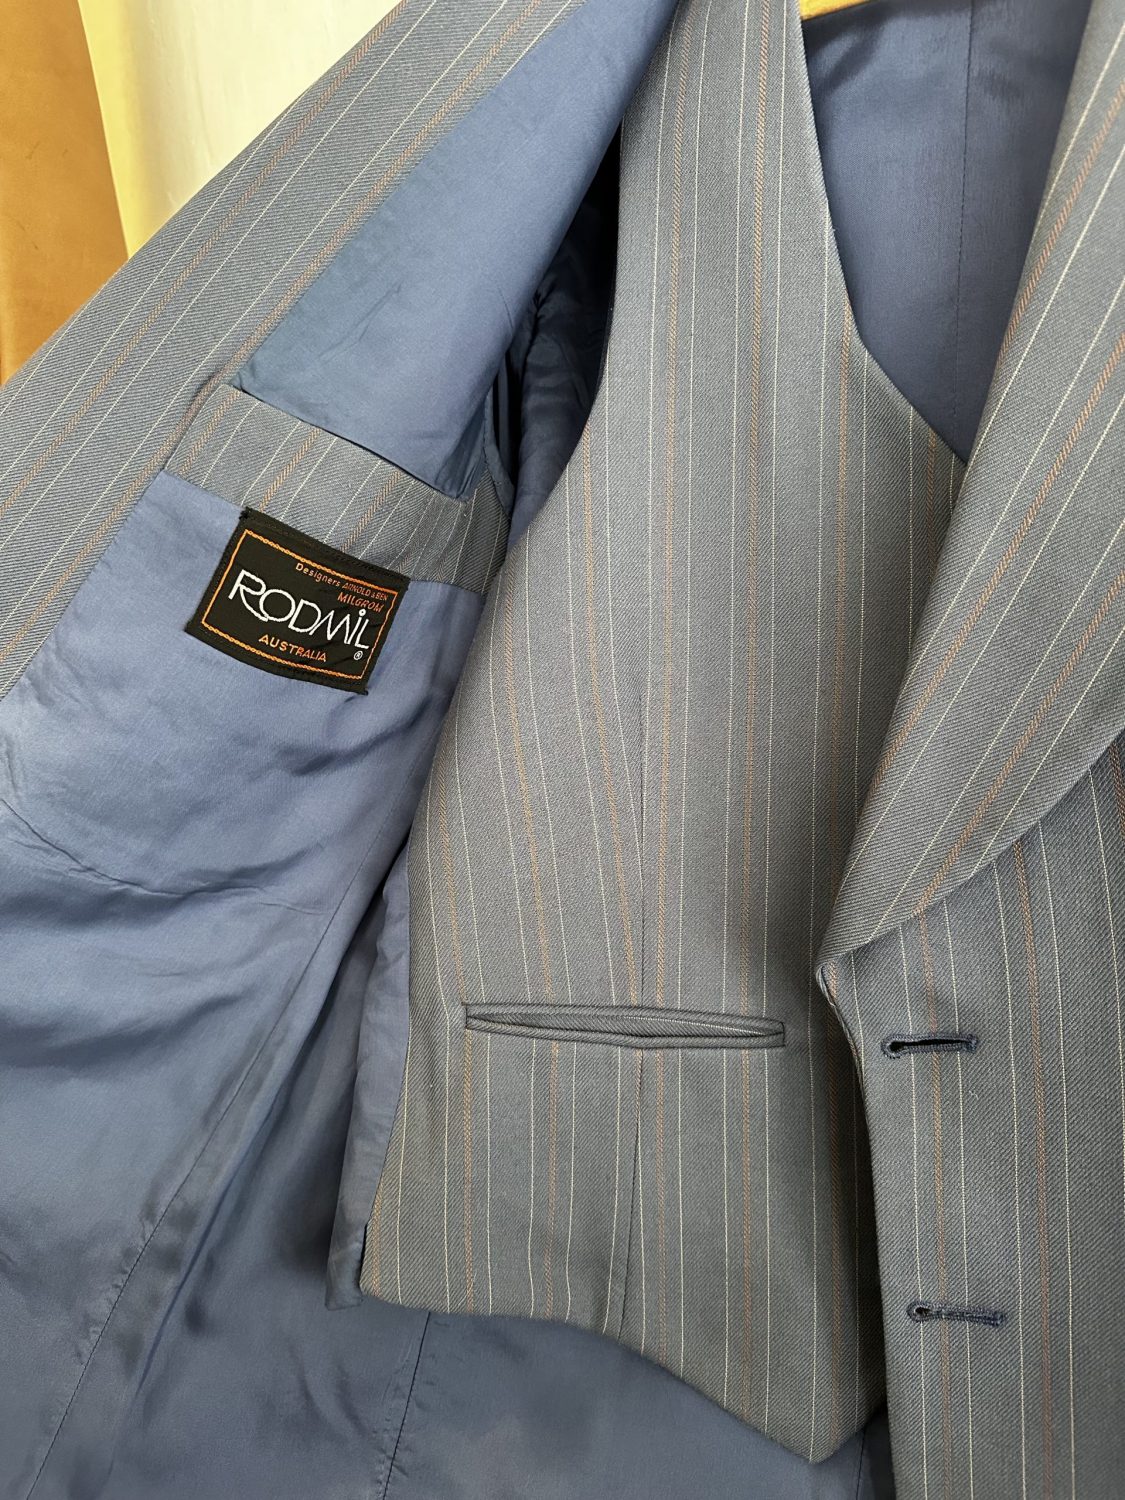 VINTAGE 70s 'RODMIL' SLATE BLUE PINSTRIPE 3PC MENS SUIT WITH 30 INCH ...